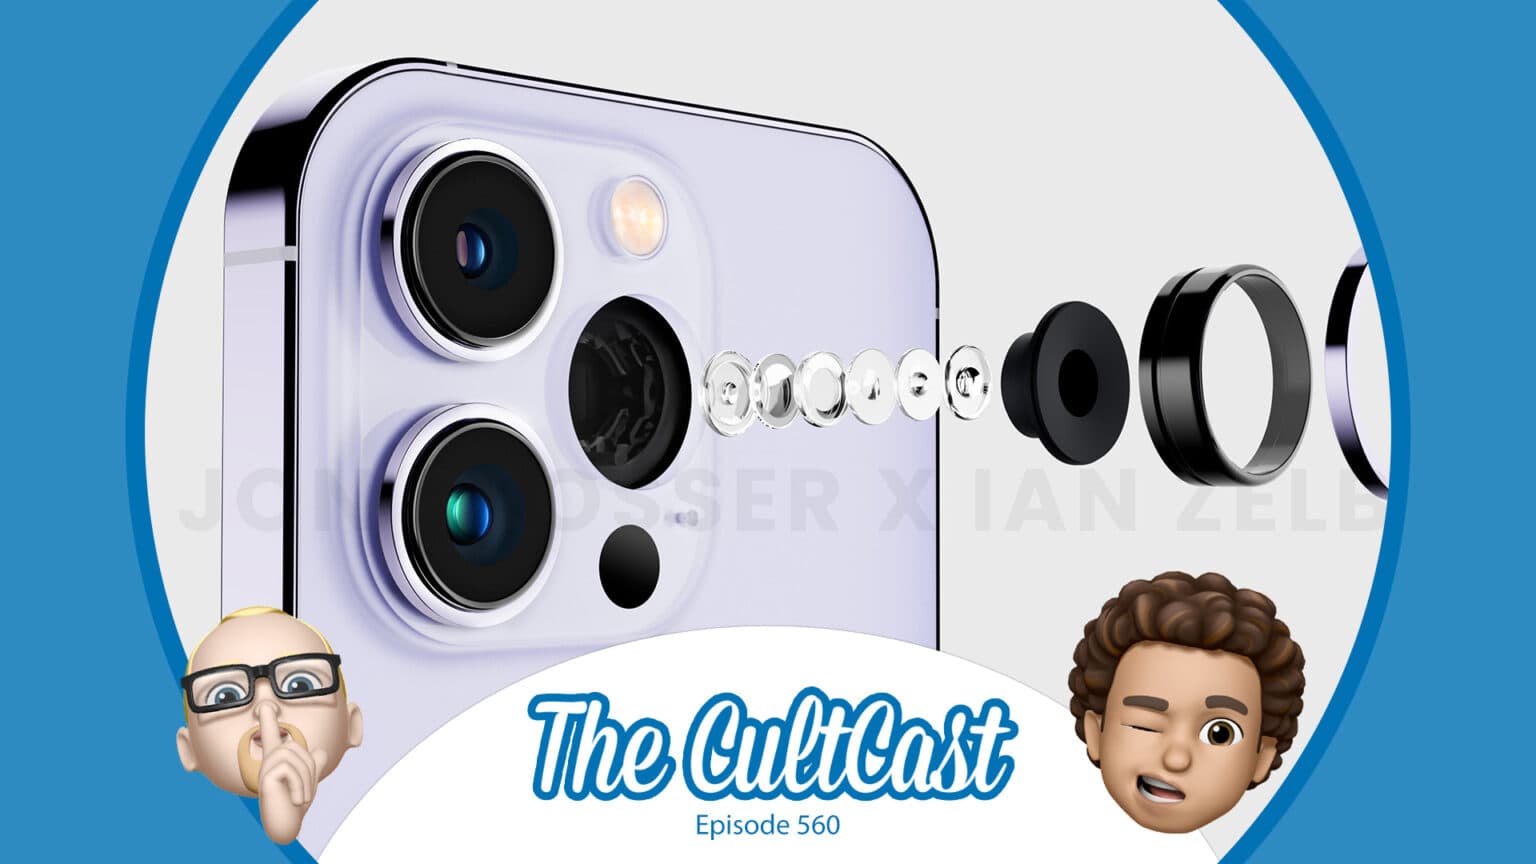 The CultCast podcast: This is the last time you'll hear us talking about what iPhone 14 might look like.